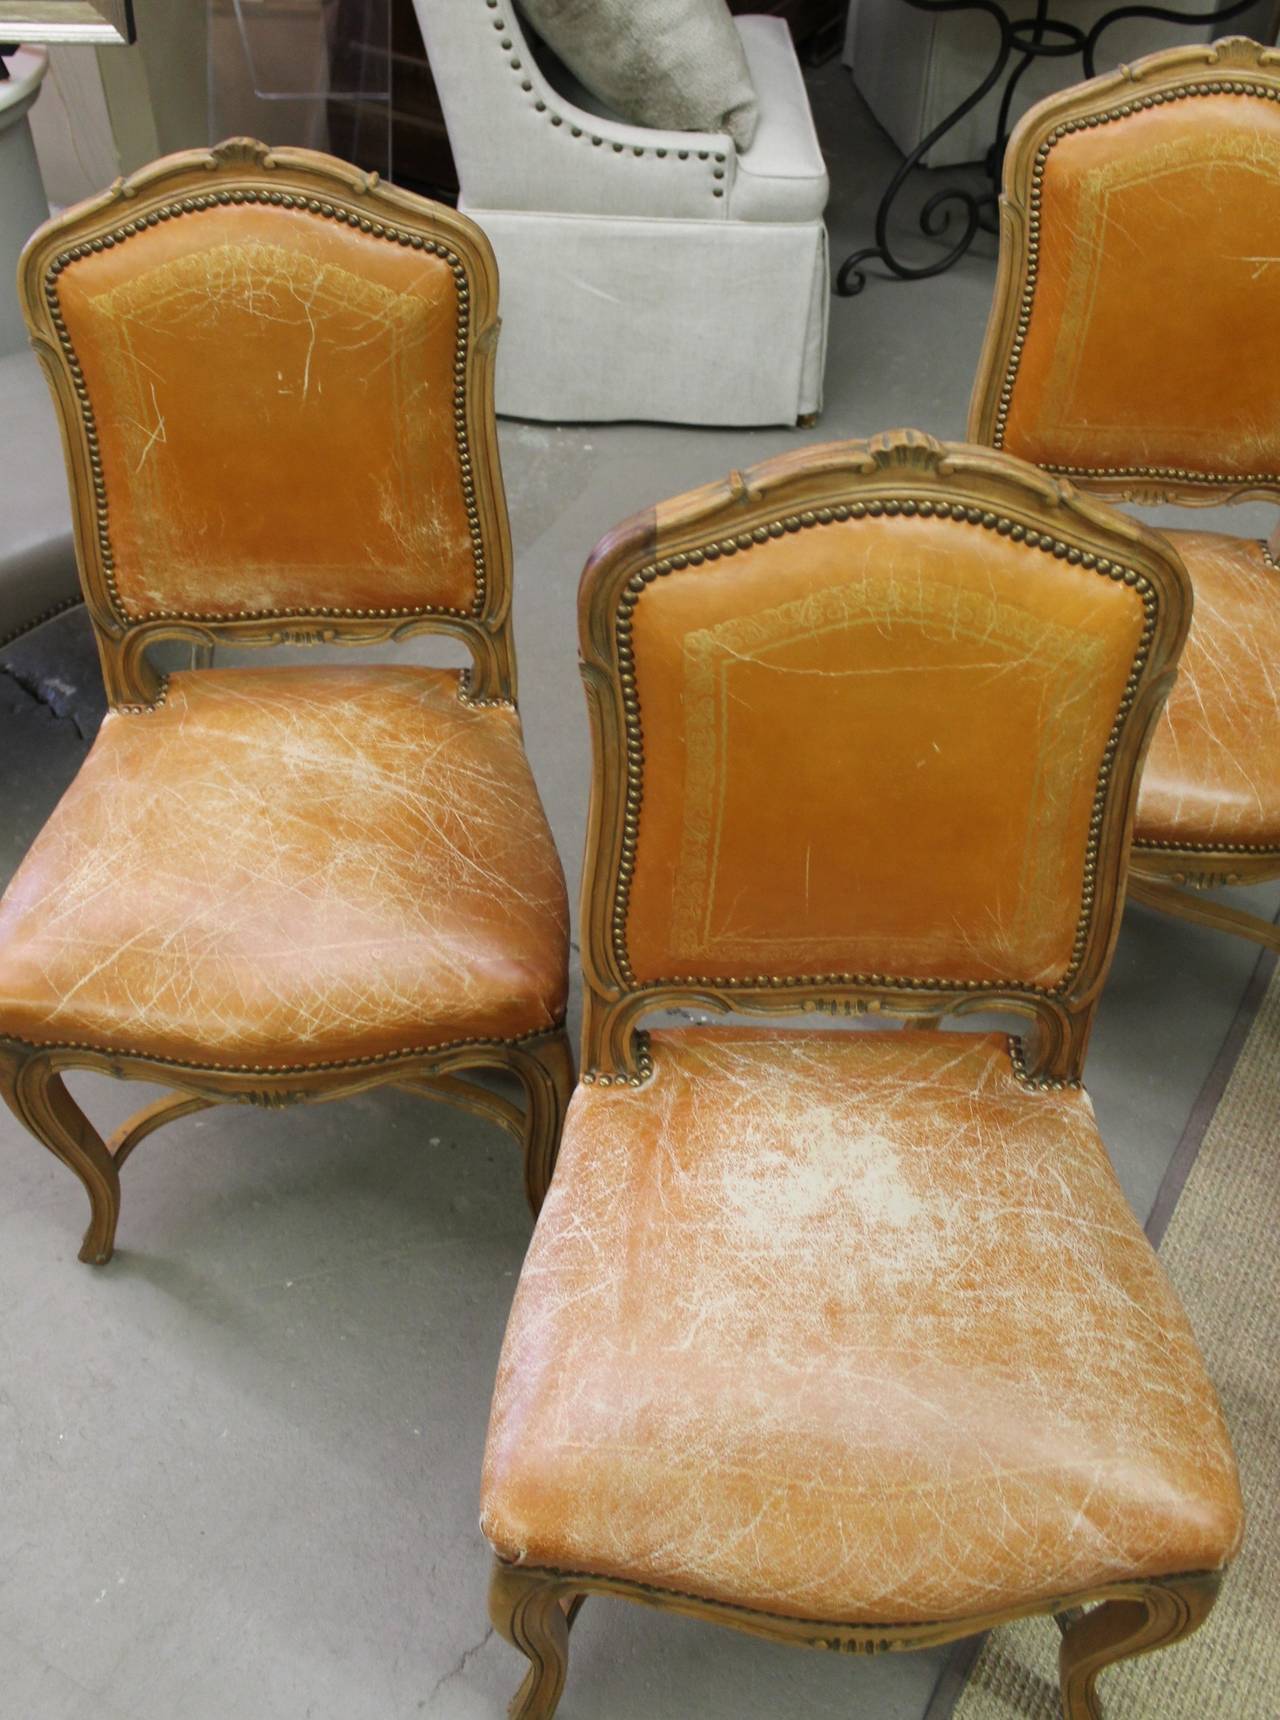 While the leather is worn its orange and fabulous, no holes. Gilt stamped design.